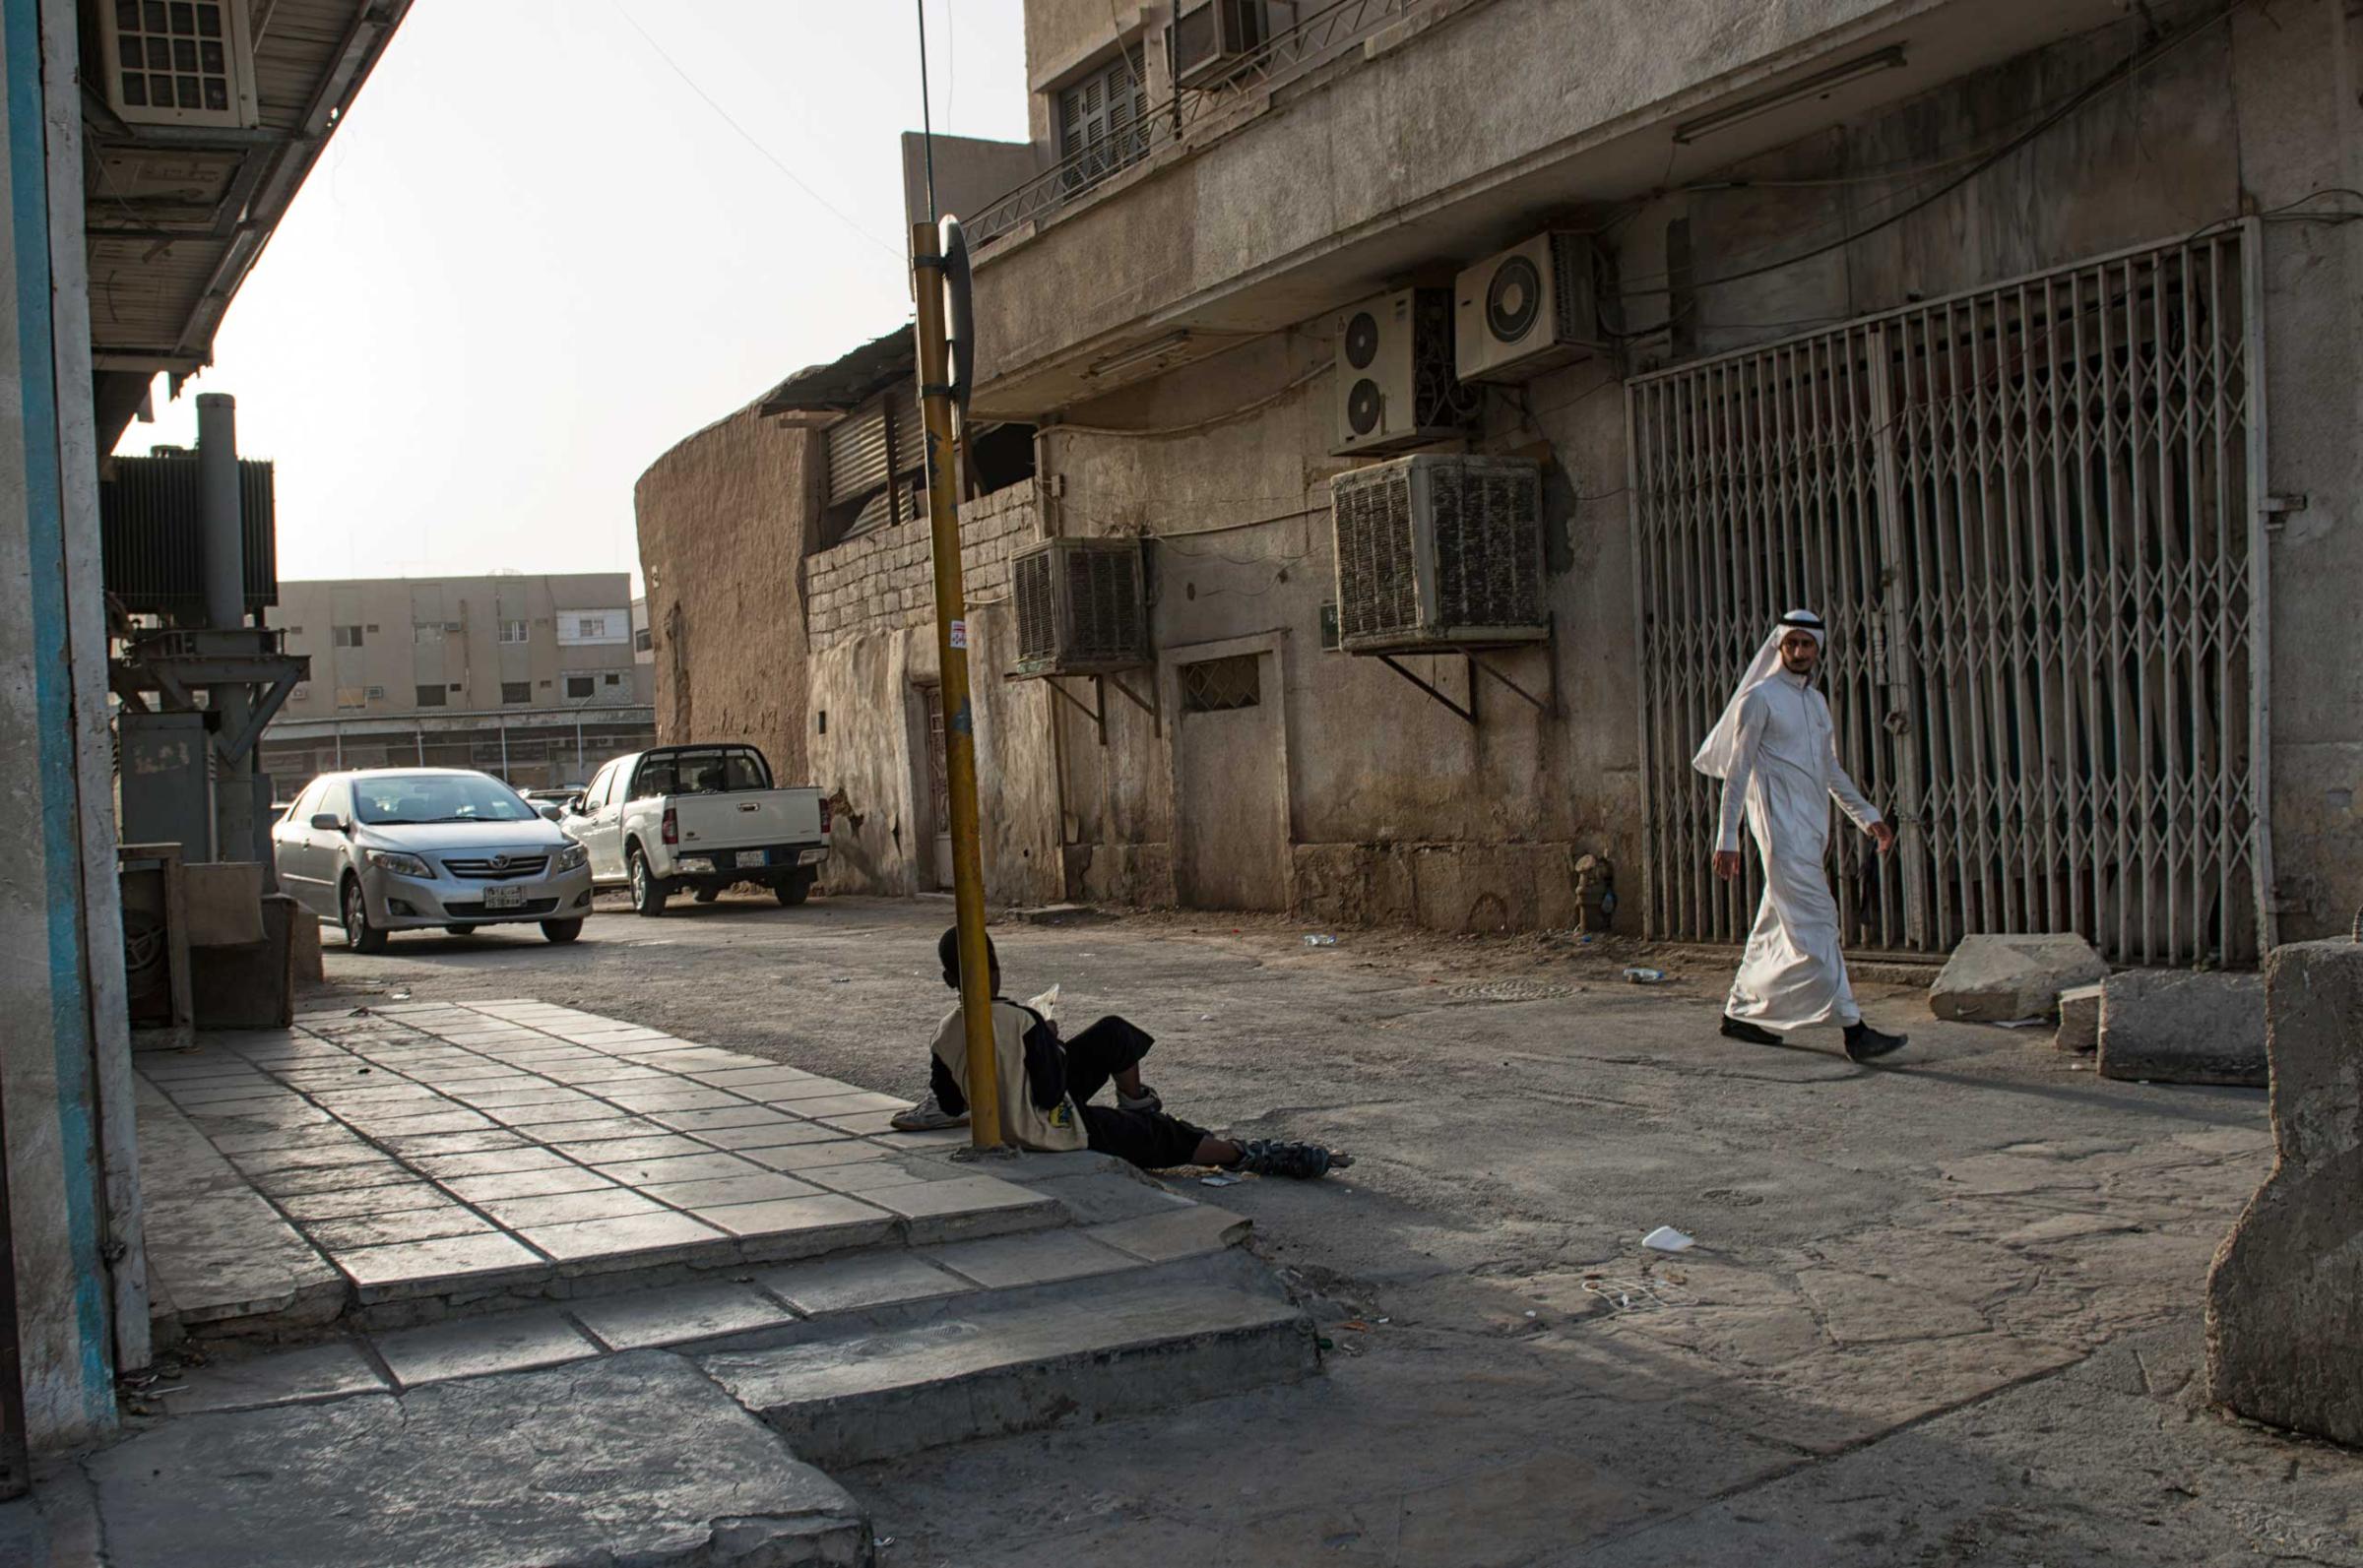 A young man begs on the streets in Riyadh, Saudi Arabia, March 3, 2013.   Despite an extremely wealthy sector of society in Saudi Arabia, and the the veneer of widespread affluence projected outside the Kingdom, severe poverty is as much an aspect of life in Riyadh as wealth. (Credit: Lynsey Addario/ VII)